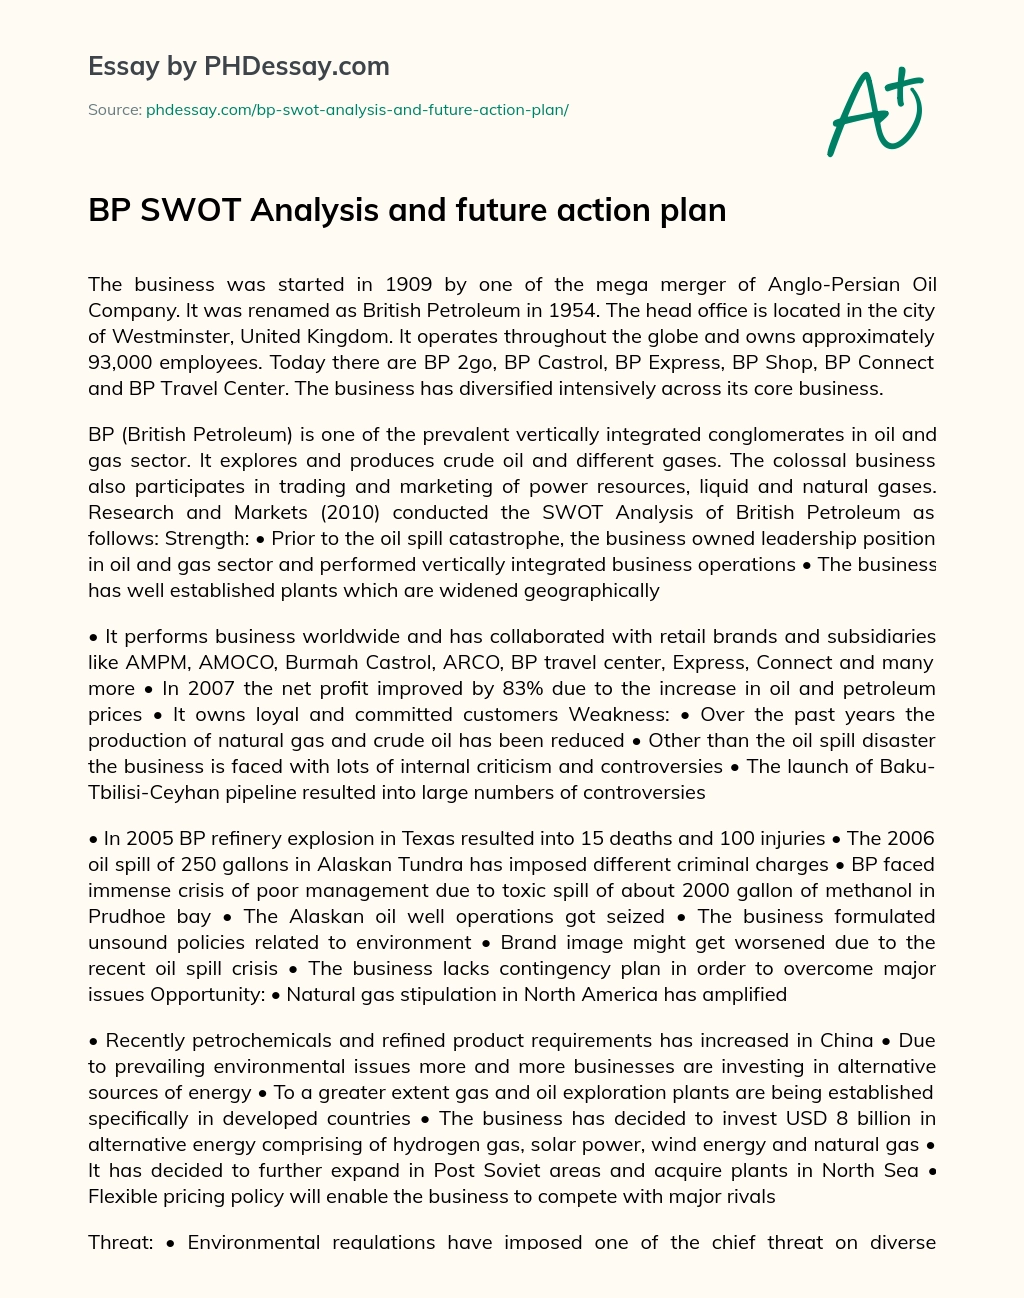 BP SWOT Analysis and future action plan essay